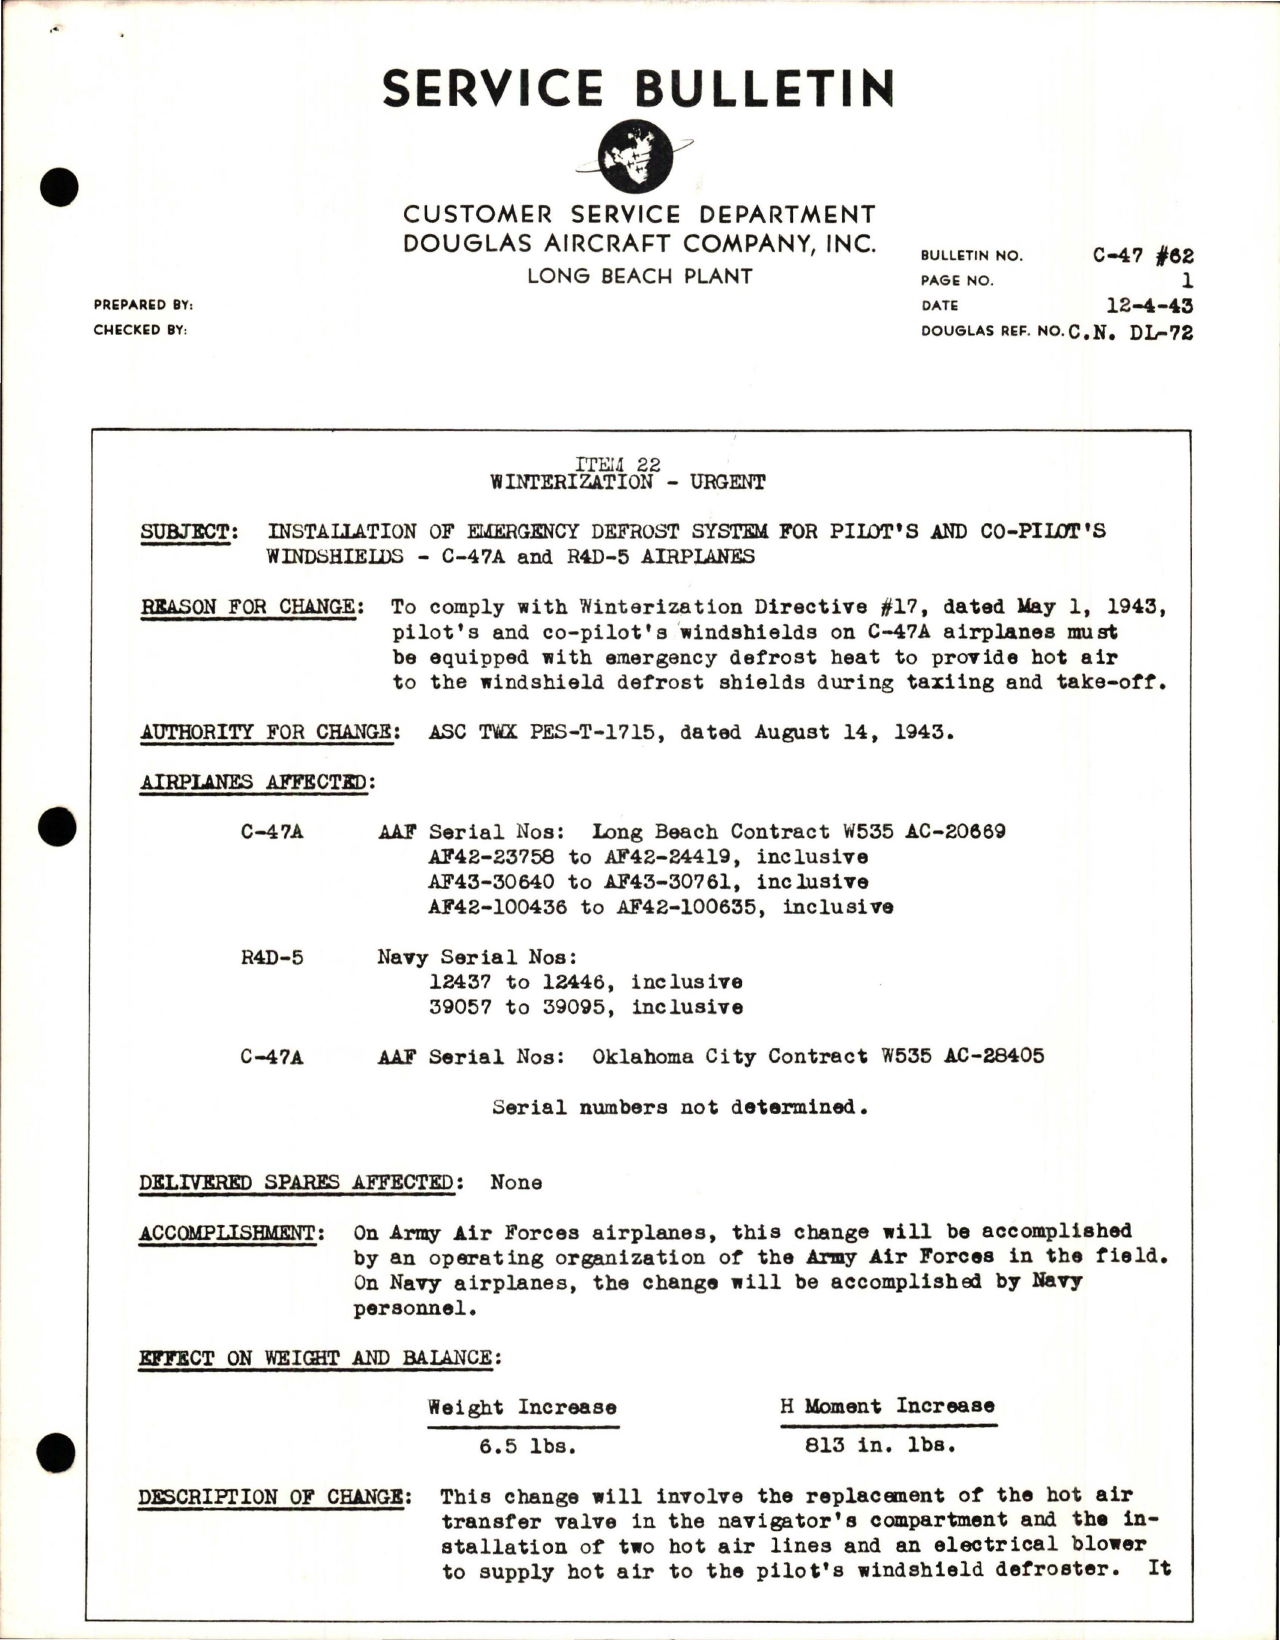 Sample page 1 from AirCorps Library document: Installation of Emergency Defrost System for Pilot's and Co-Pilot's Windshields